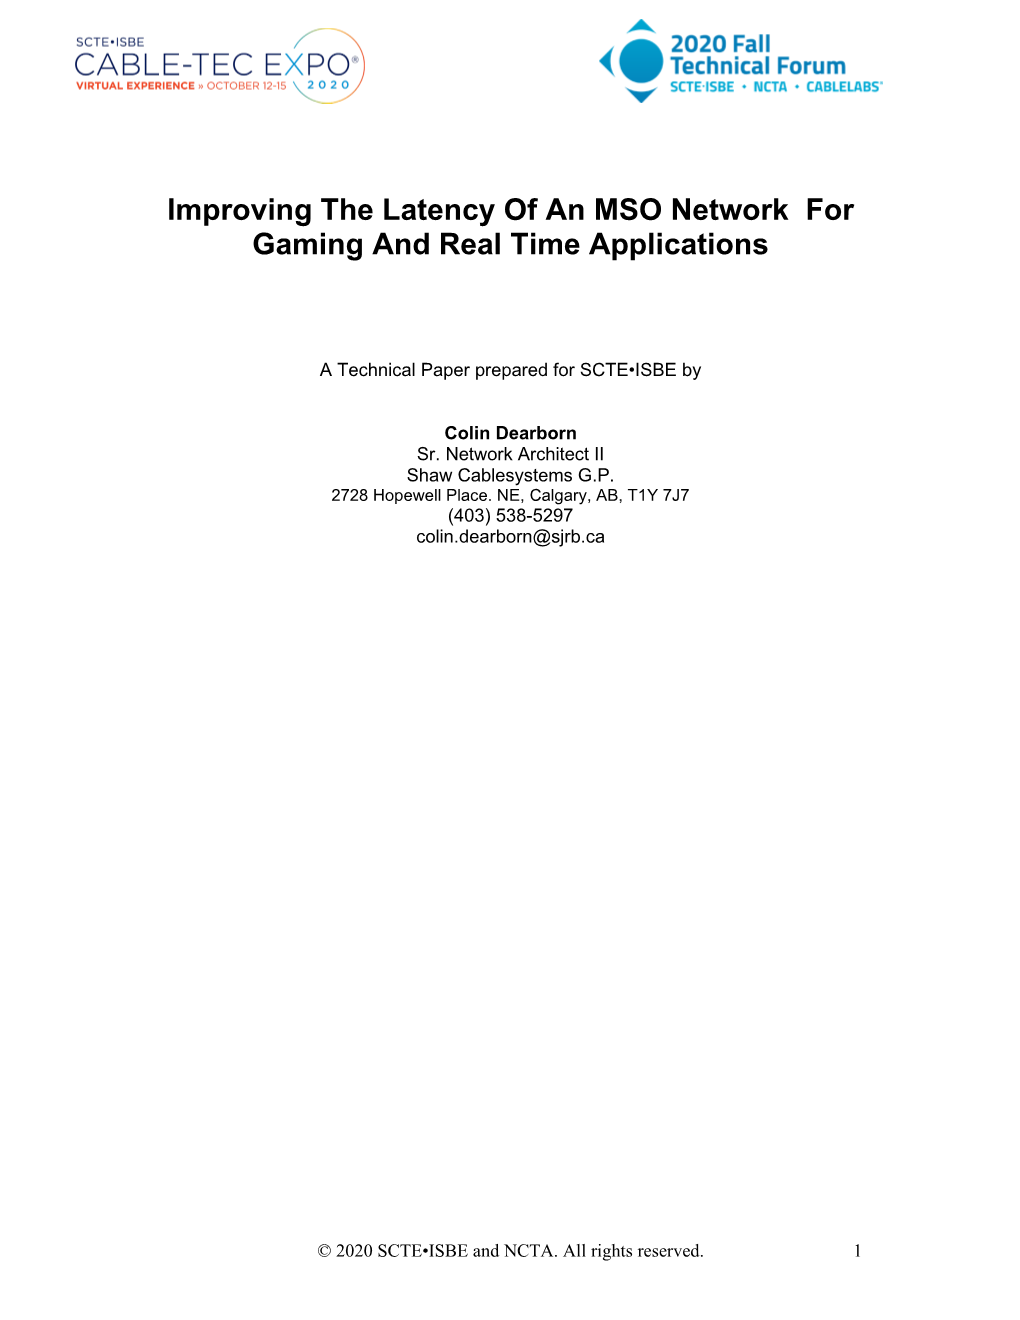 Improving the Latency of an MSO Network for Gaming and Real Time Applications